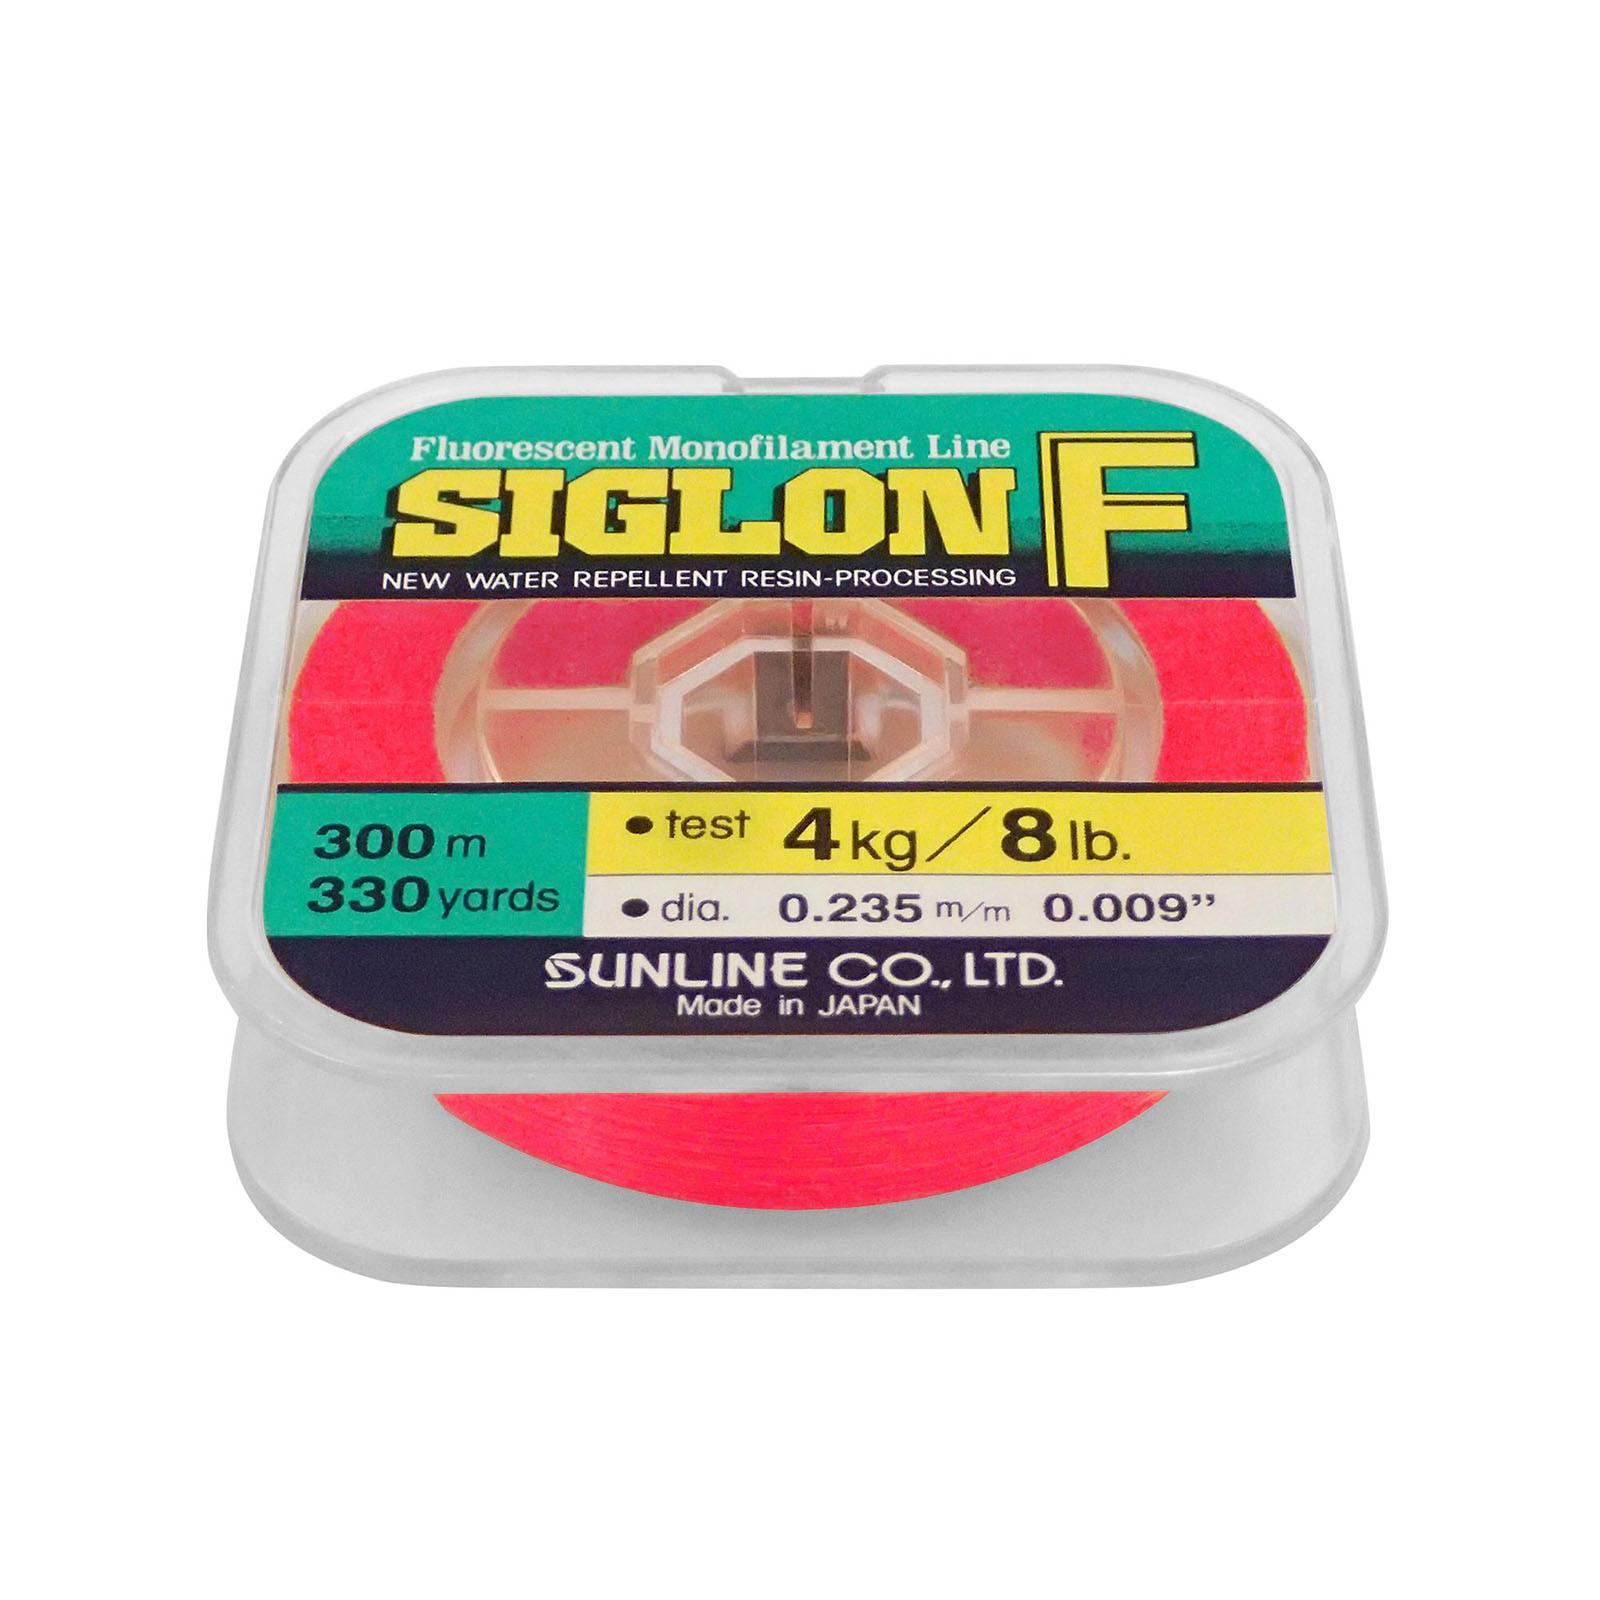 Sunline Siglon Monofilament Line - Fin Feather Fur Outfitters